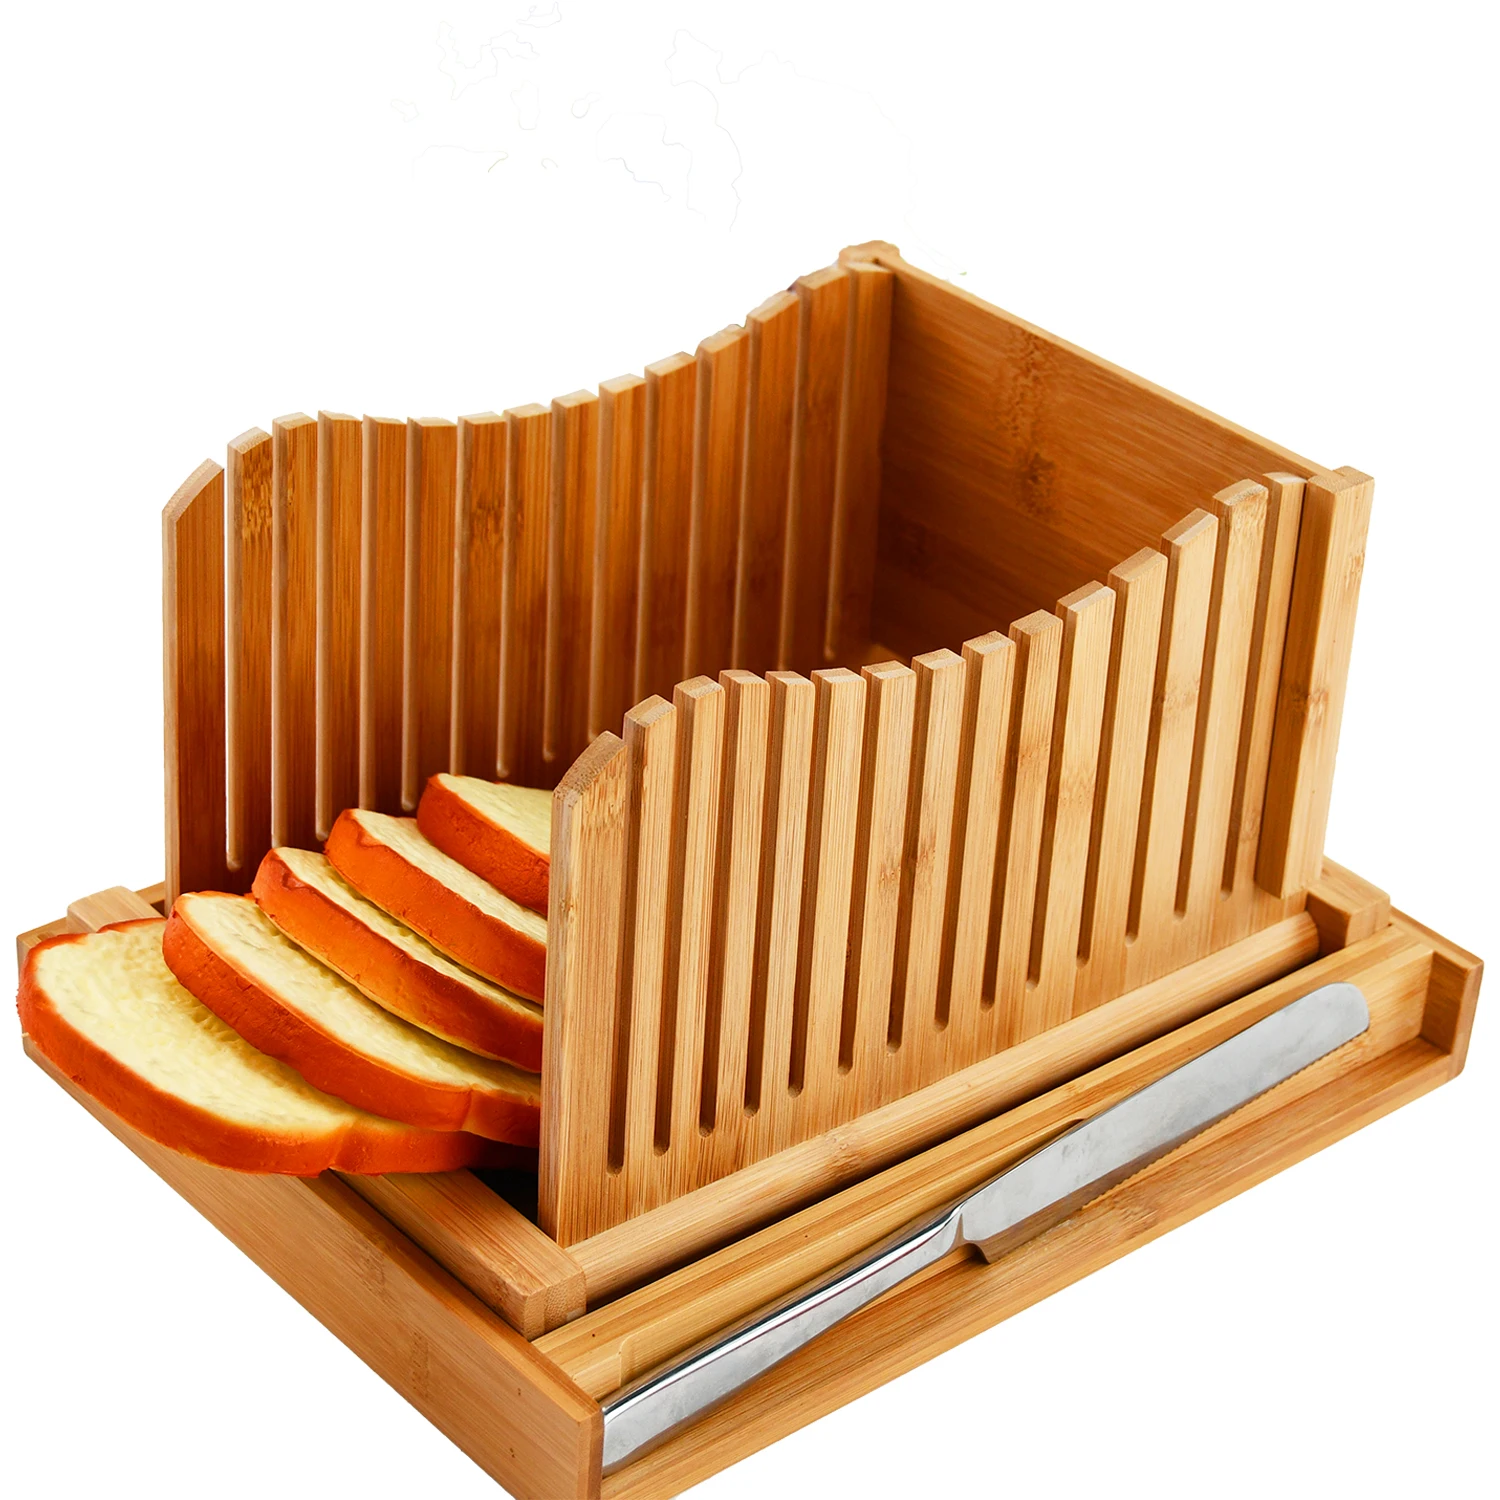 A Home Bamboo Bread Slicer For Homemade Bread,Adjustable Width Bread Slicing  Guides